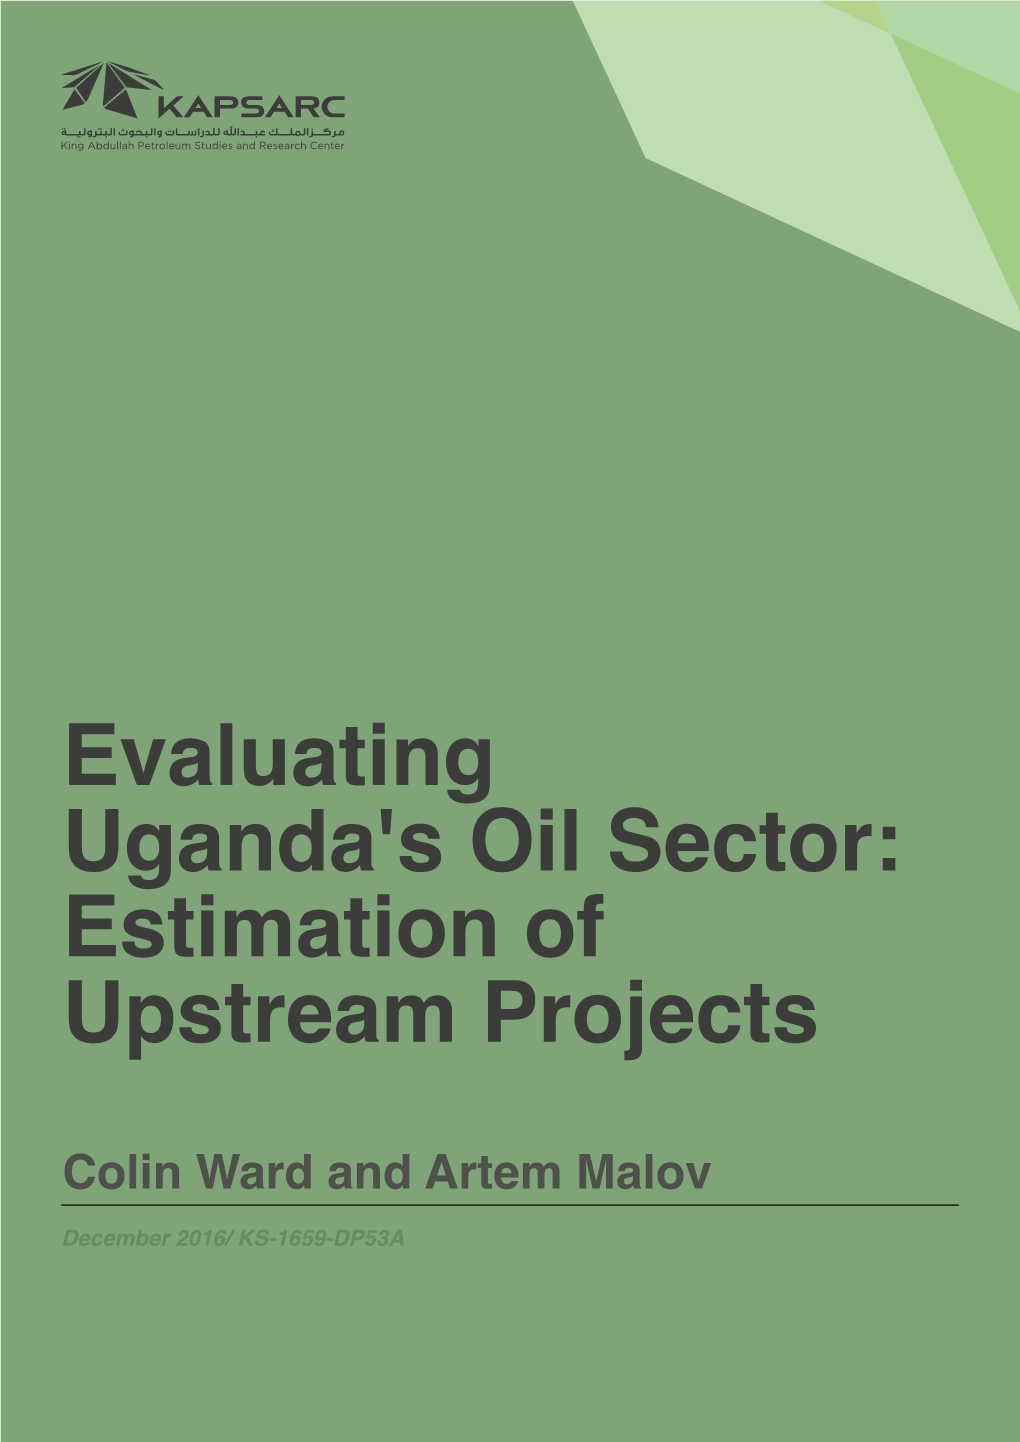 Evaluating Uganda's Oil Sector: Estimation of Upstream Projects